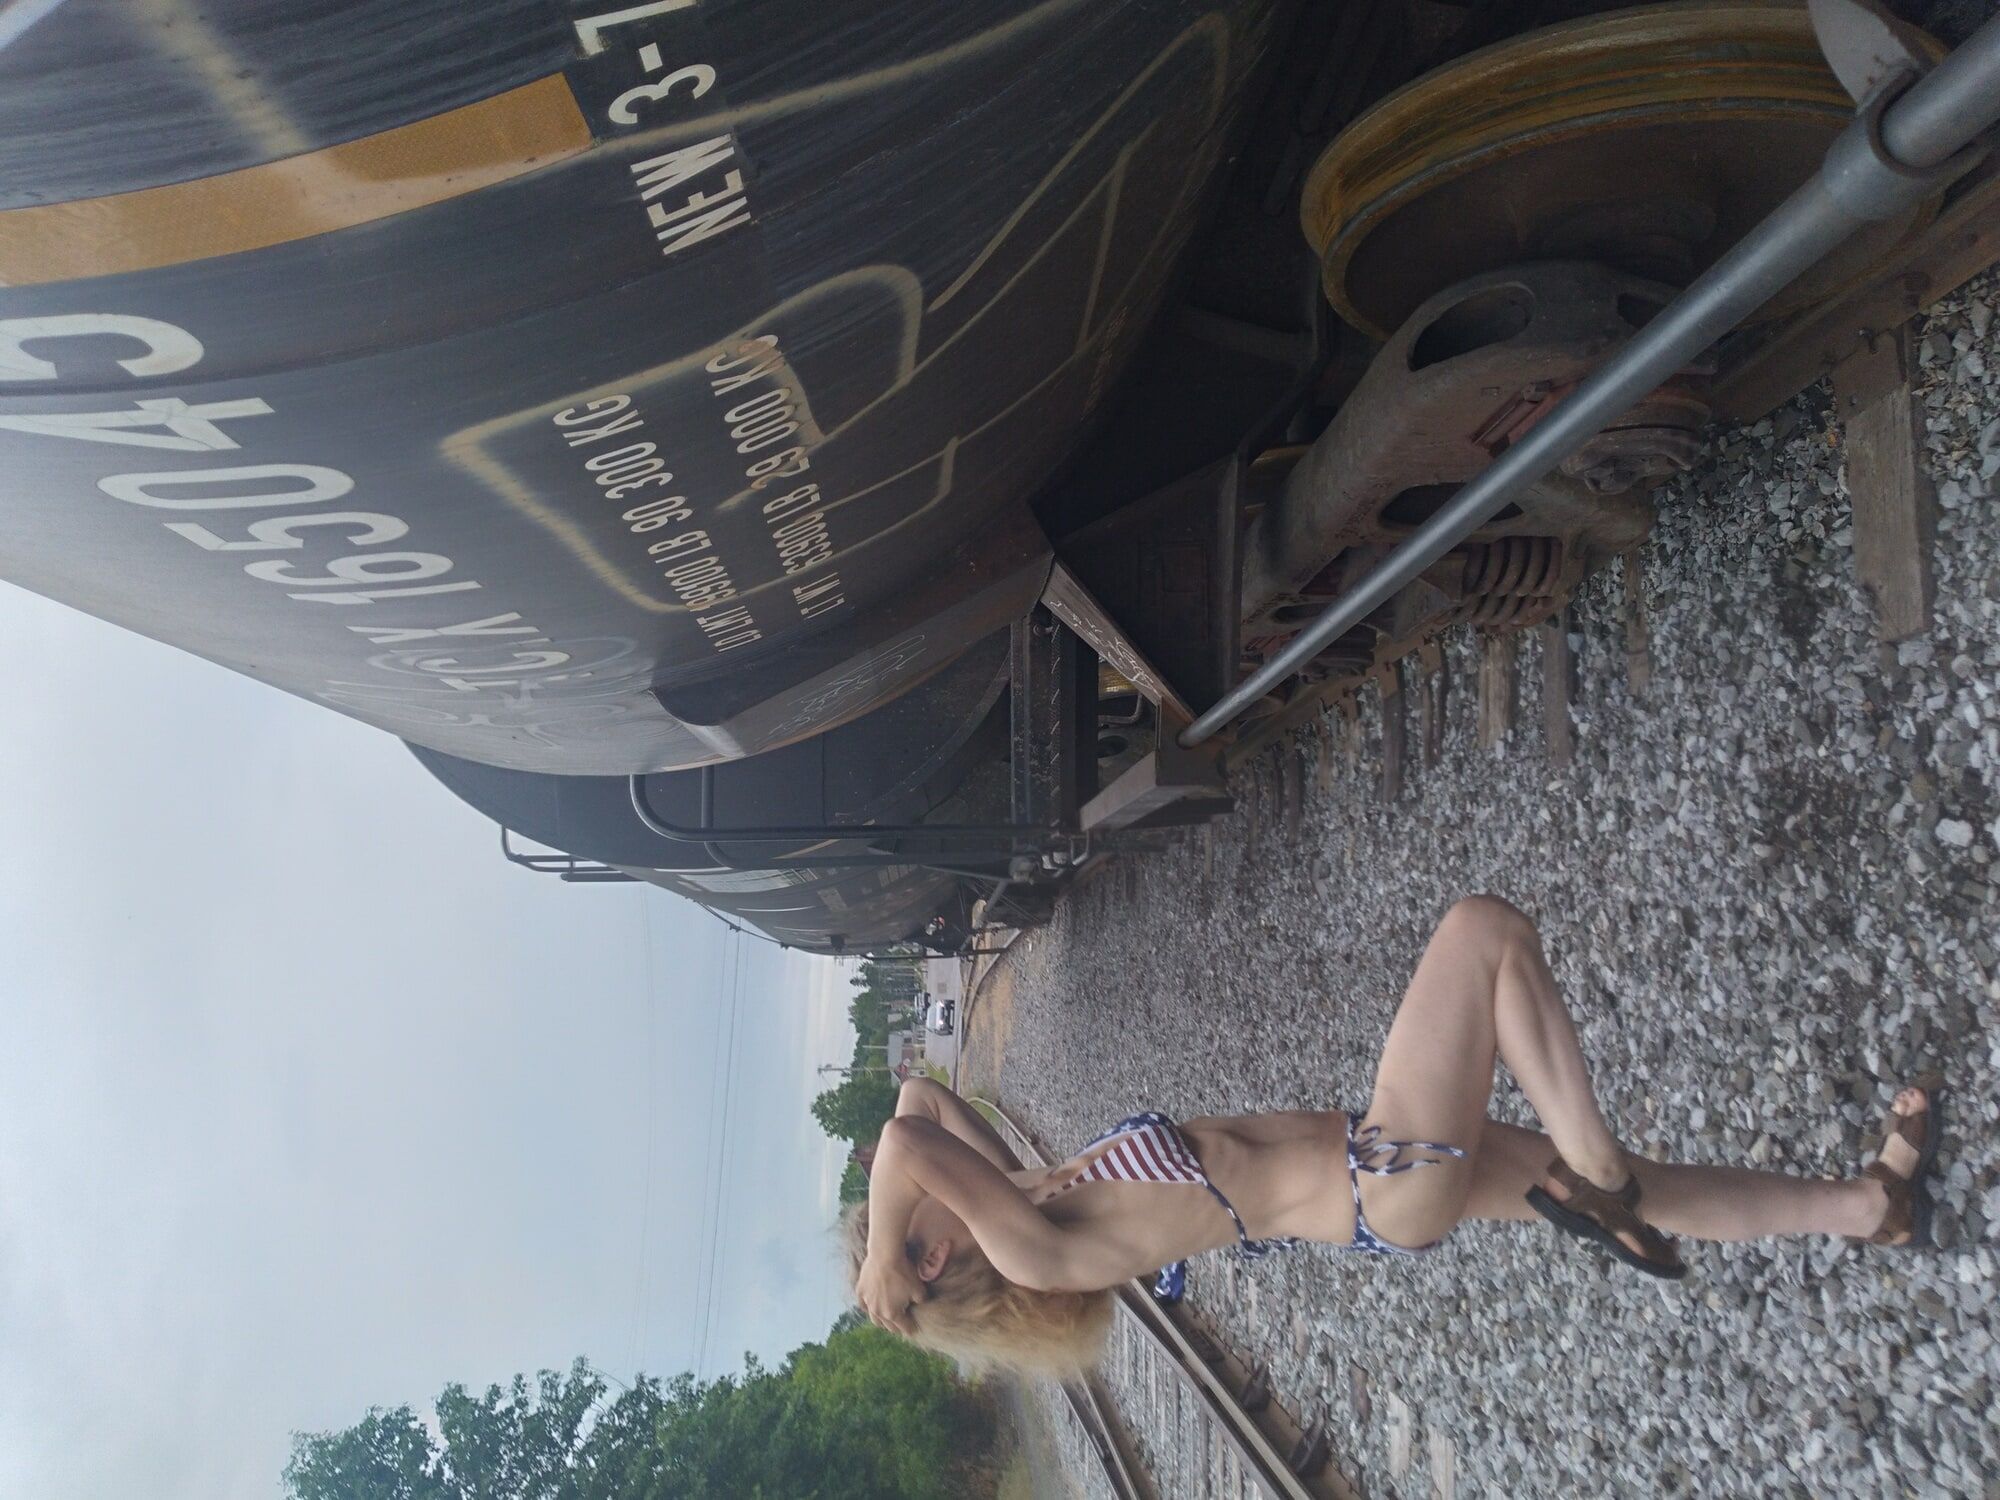 American Train. July 4th release. My best photo set to date. #51